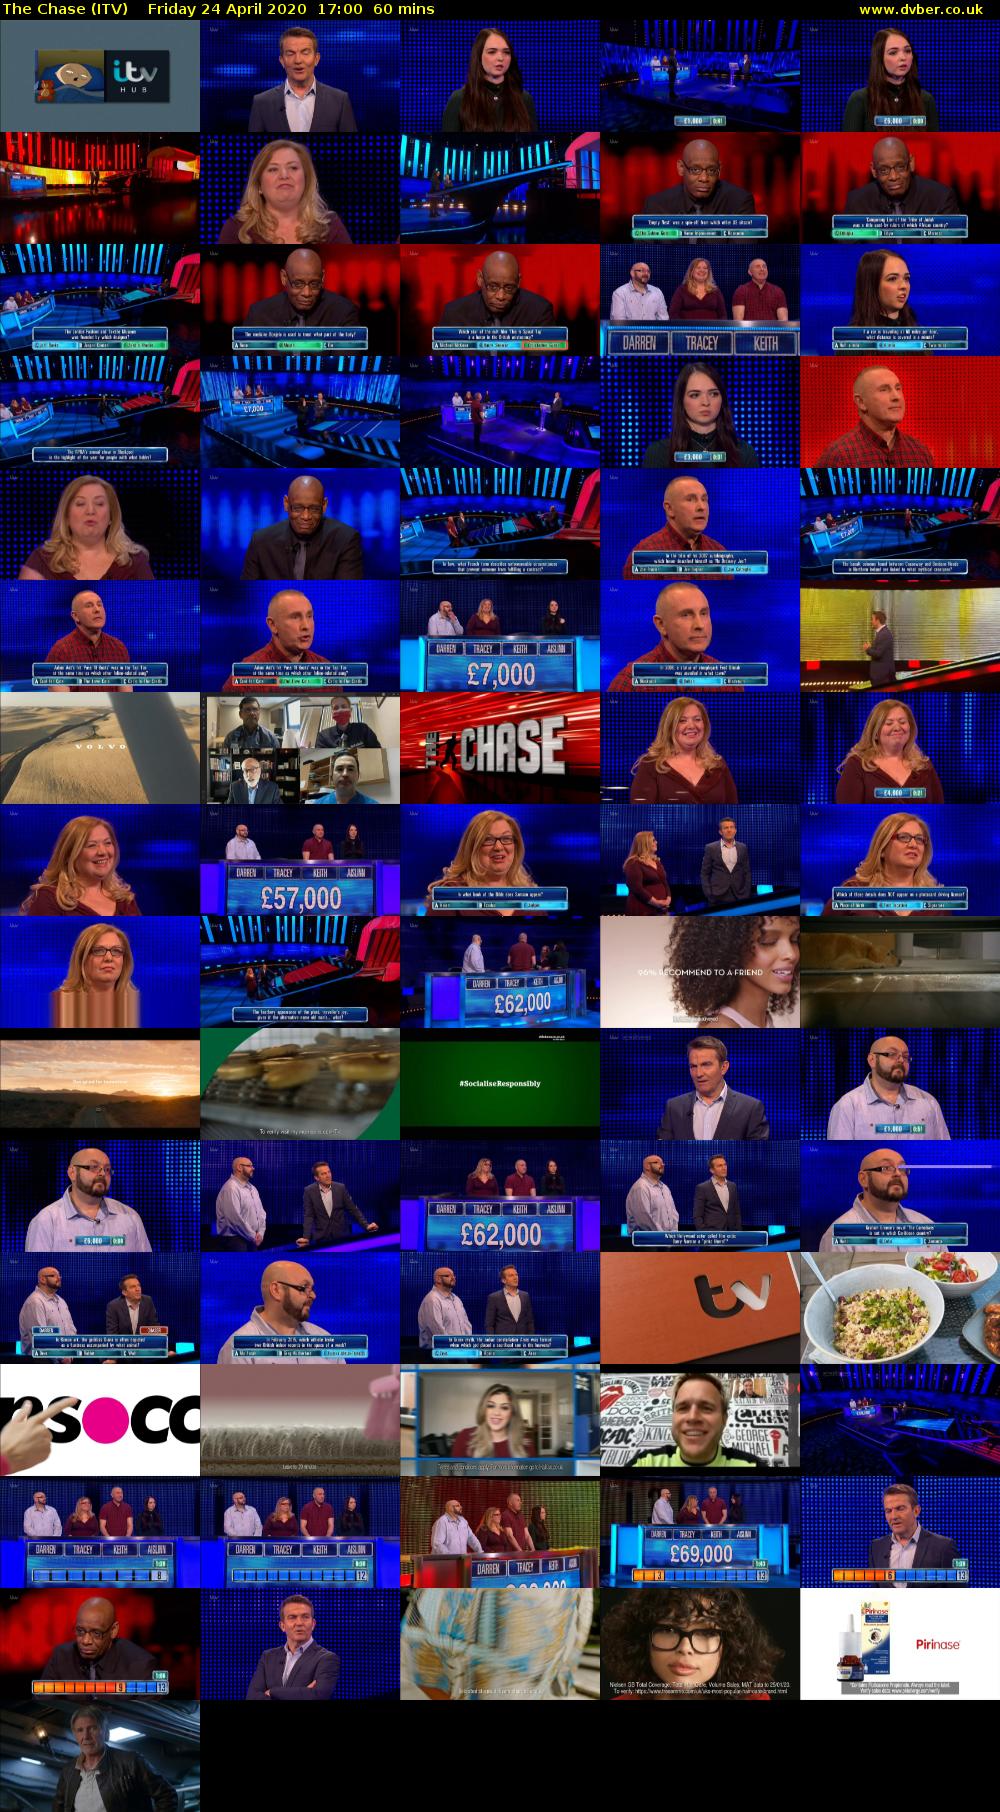 The Chase (ITV) Friday 24 April 2020 17:00 - 18:00